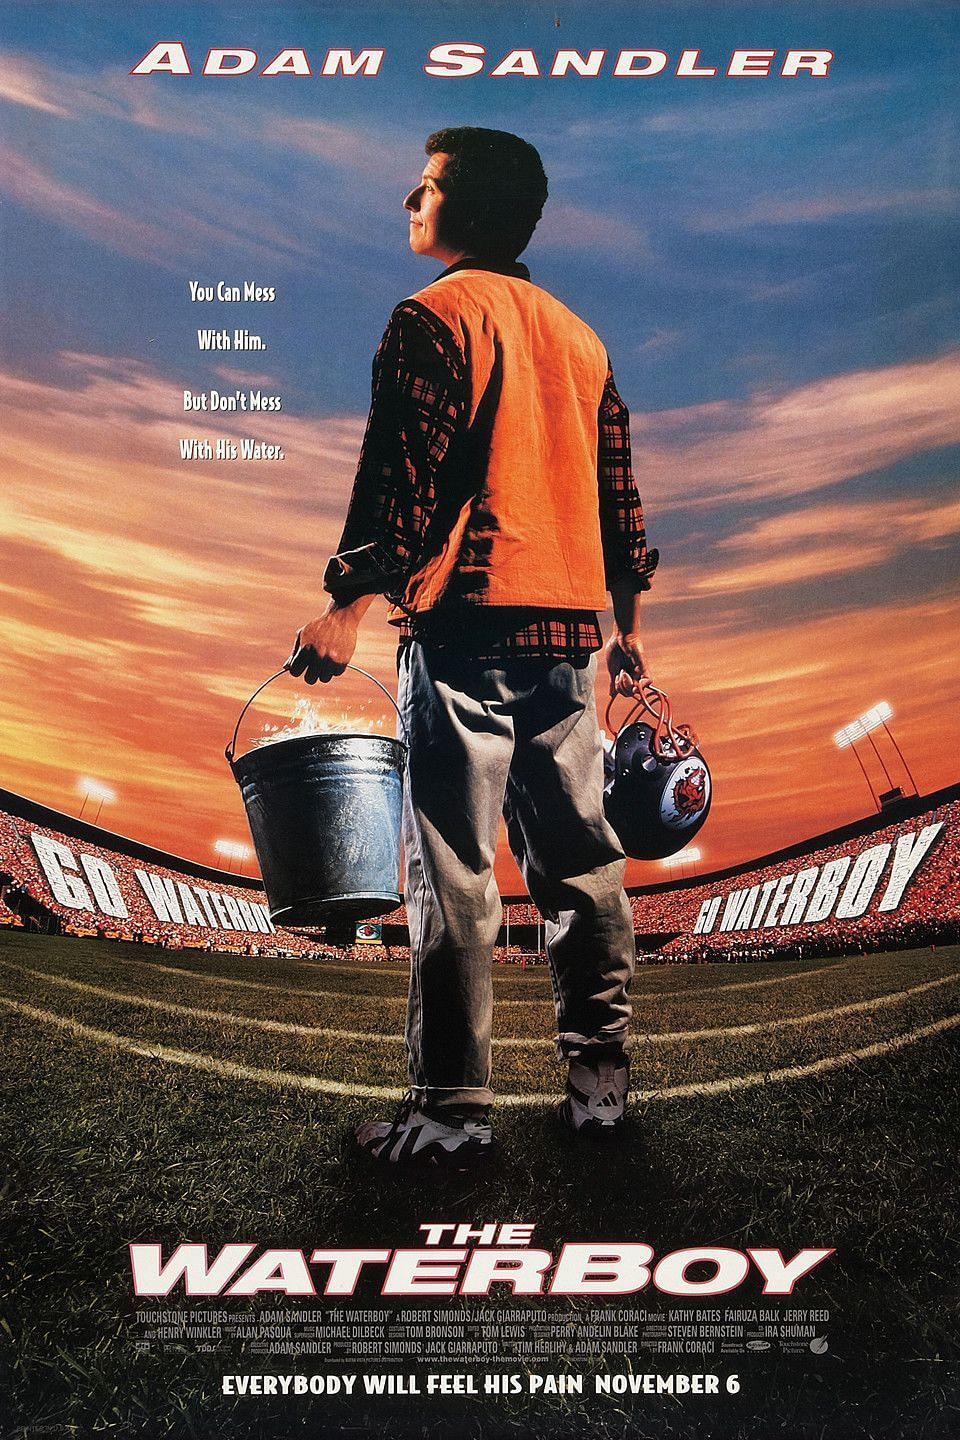 The Waterboy, 1998 (Image via Touchstone Pictures)